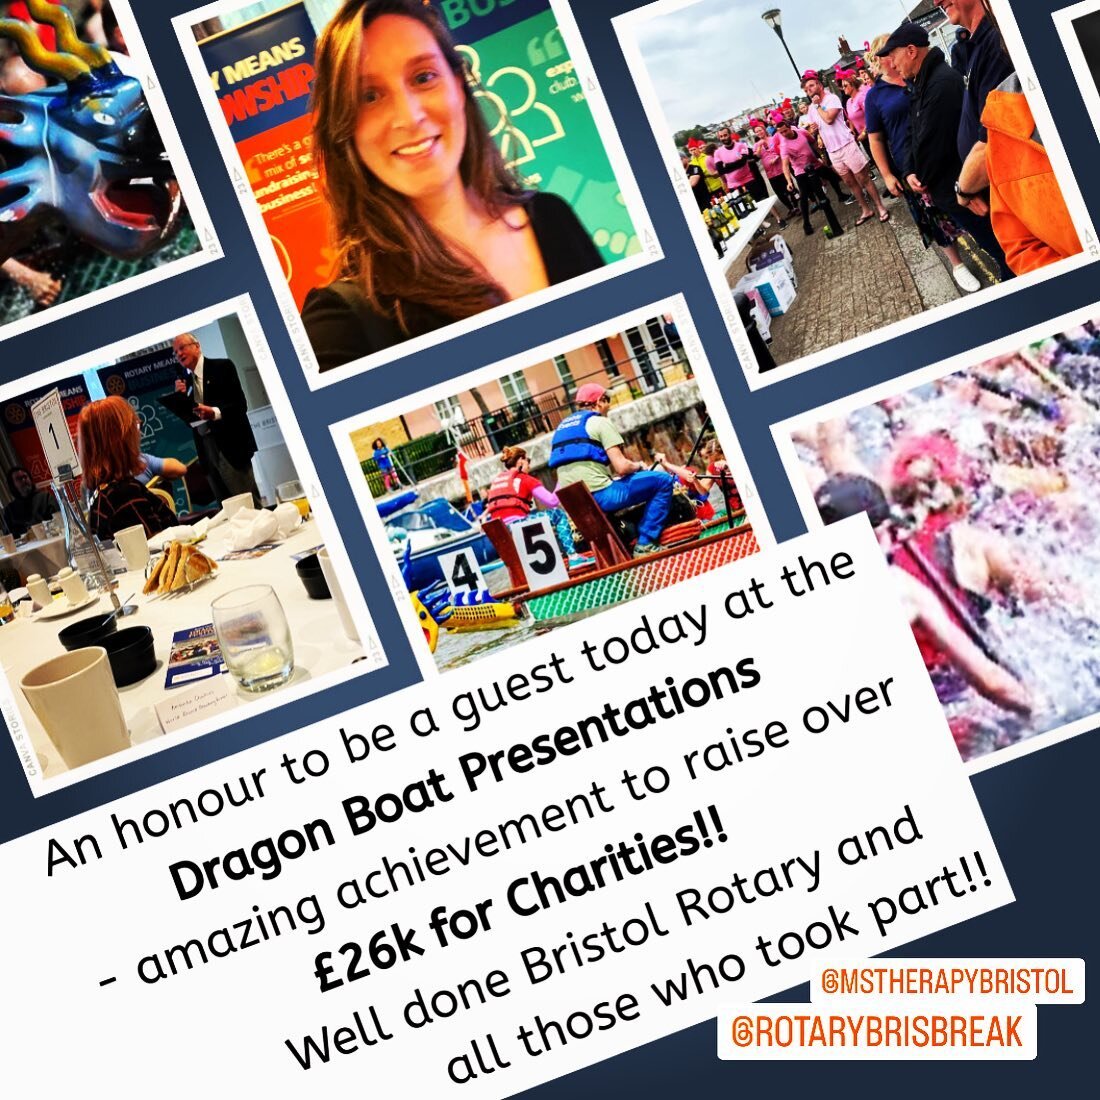 After a few years of not being about run events like this it&rsquo;s heartwarming to see fundraisers and big in person events are back on!! 🙌🛶

A huge achievement to everyone who was involved in the Bristol Dragon Boat Race this year. With over &po